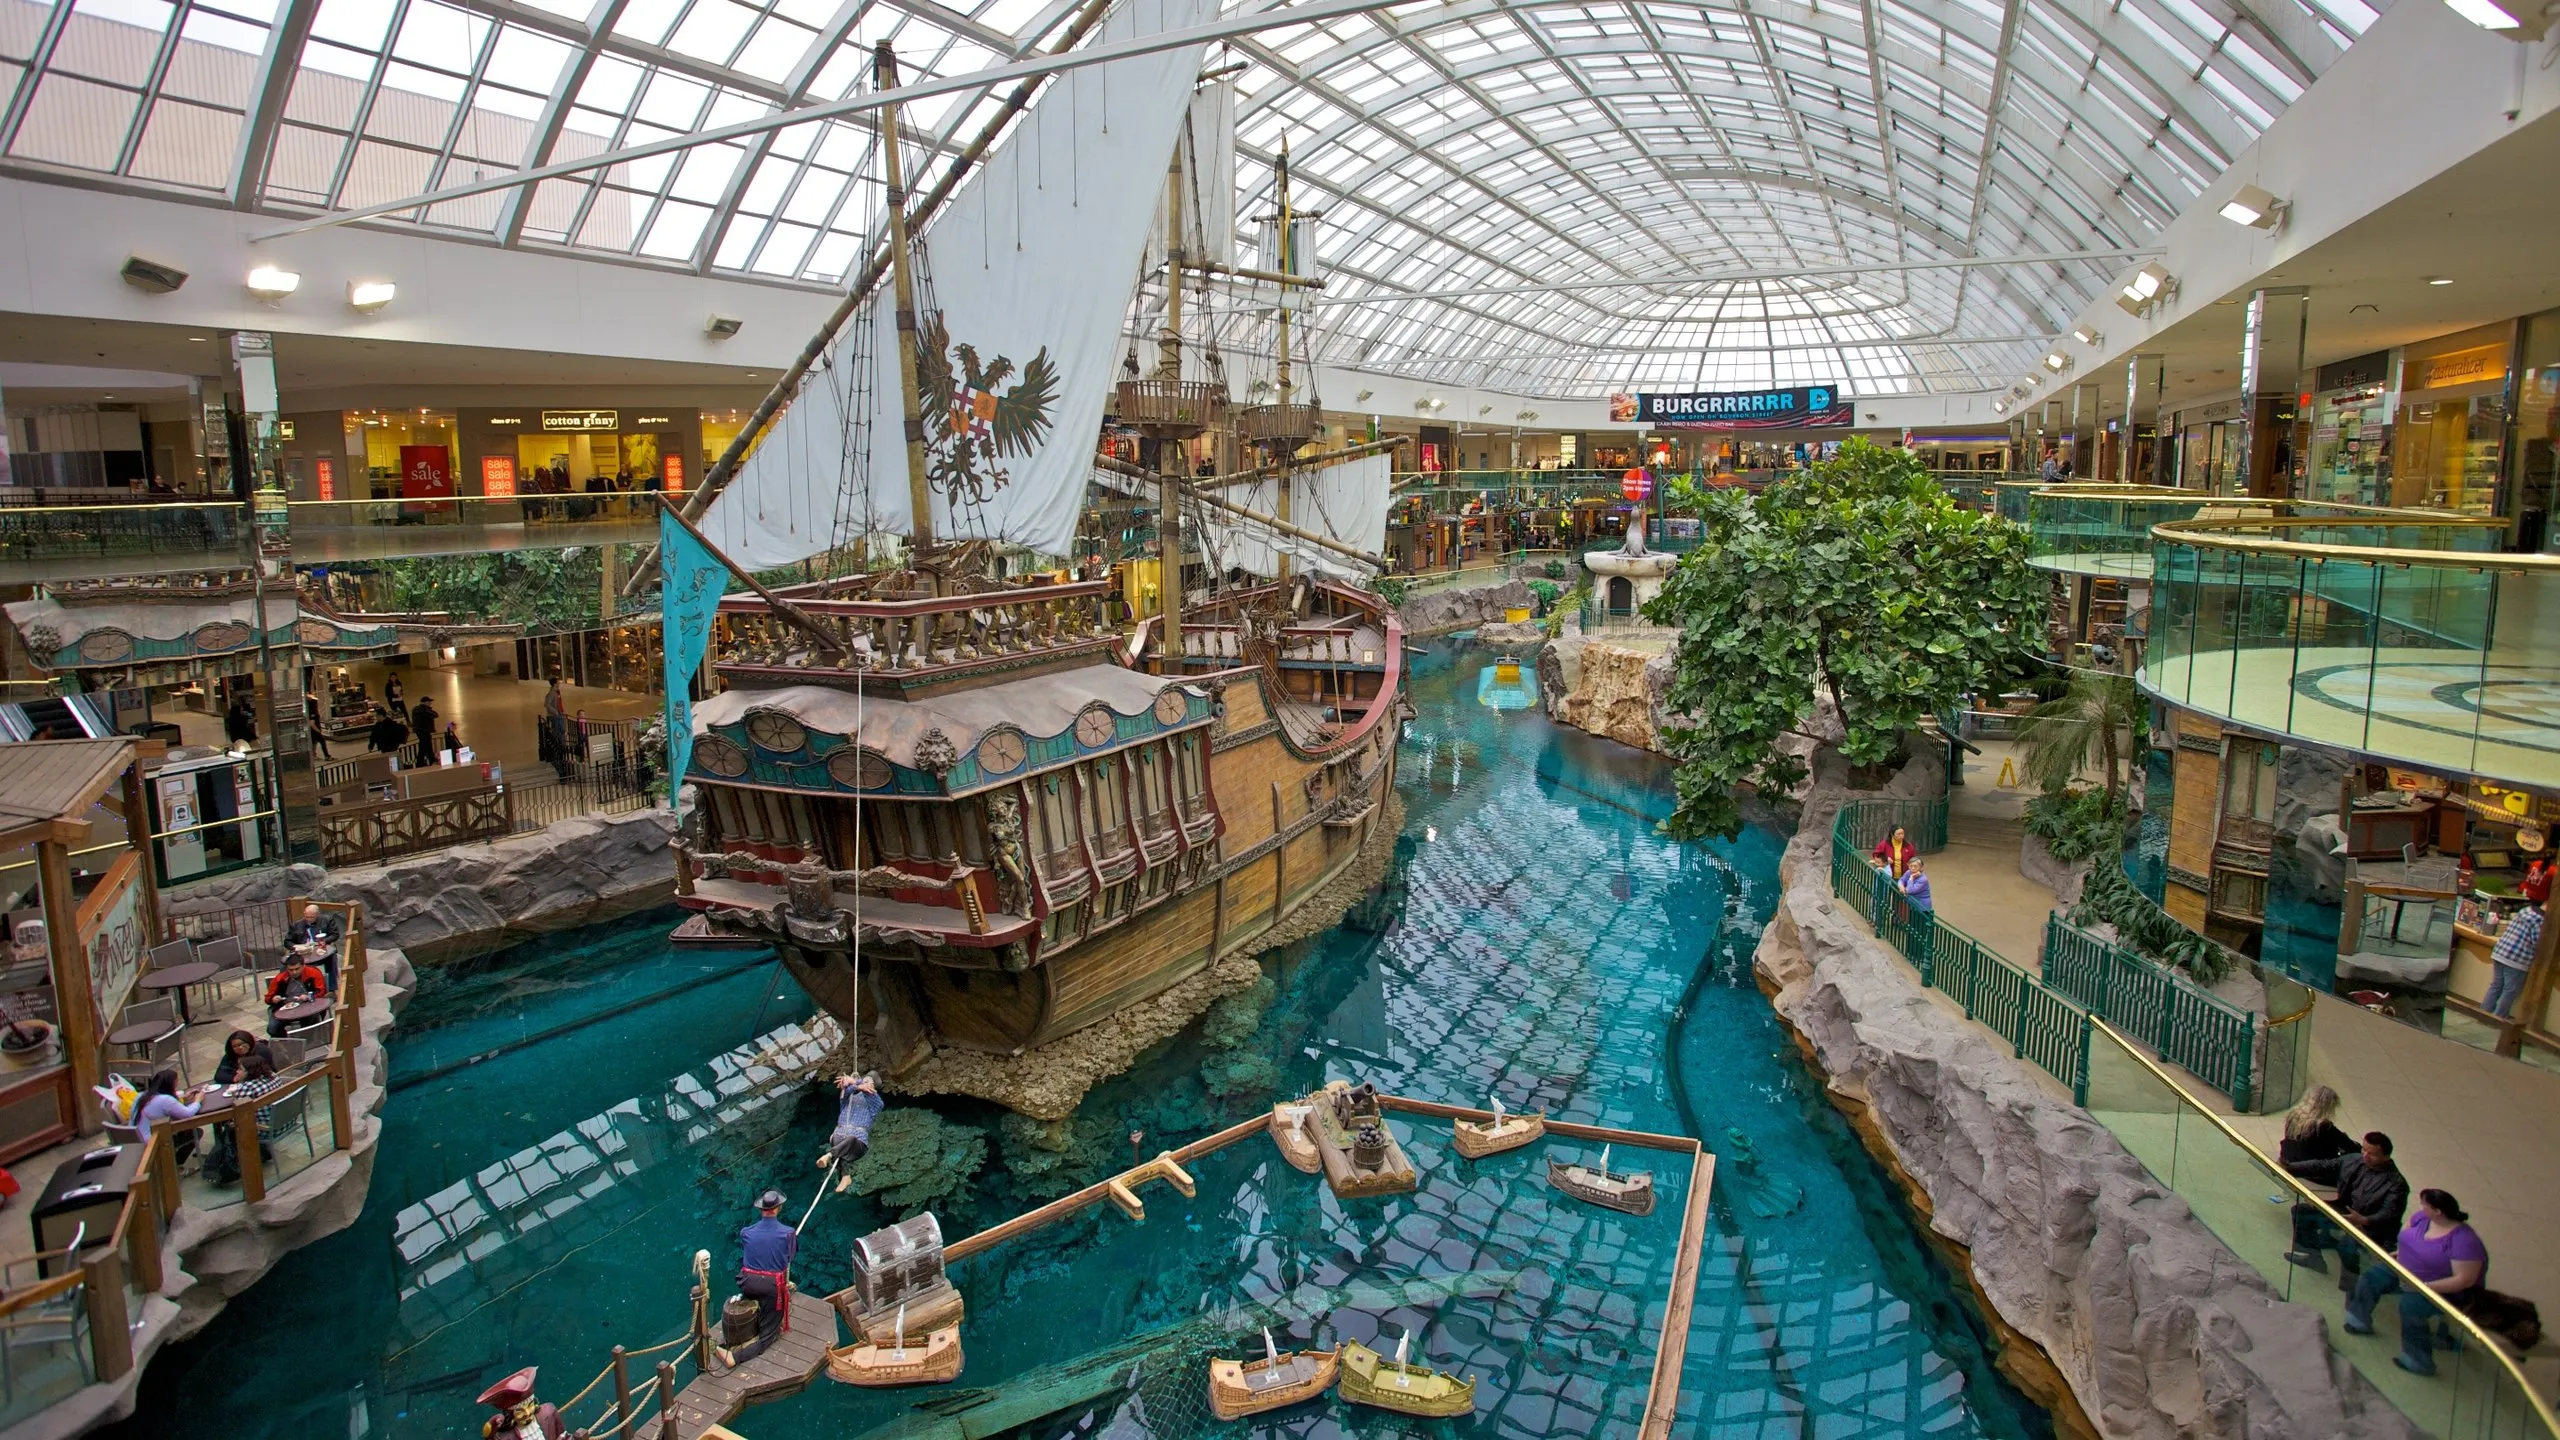 West Edmonton Mall in Canada, north_america | Fragrance,Handbags,Shoes,Clothes,Cosmetics,Sportswear - Country Helper